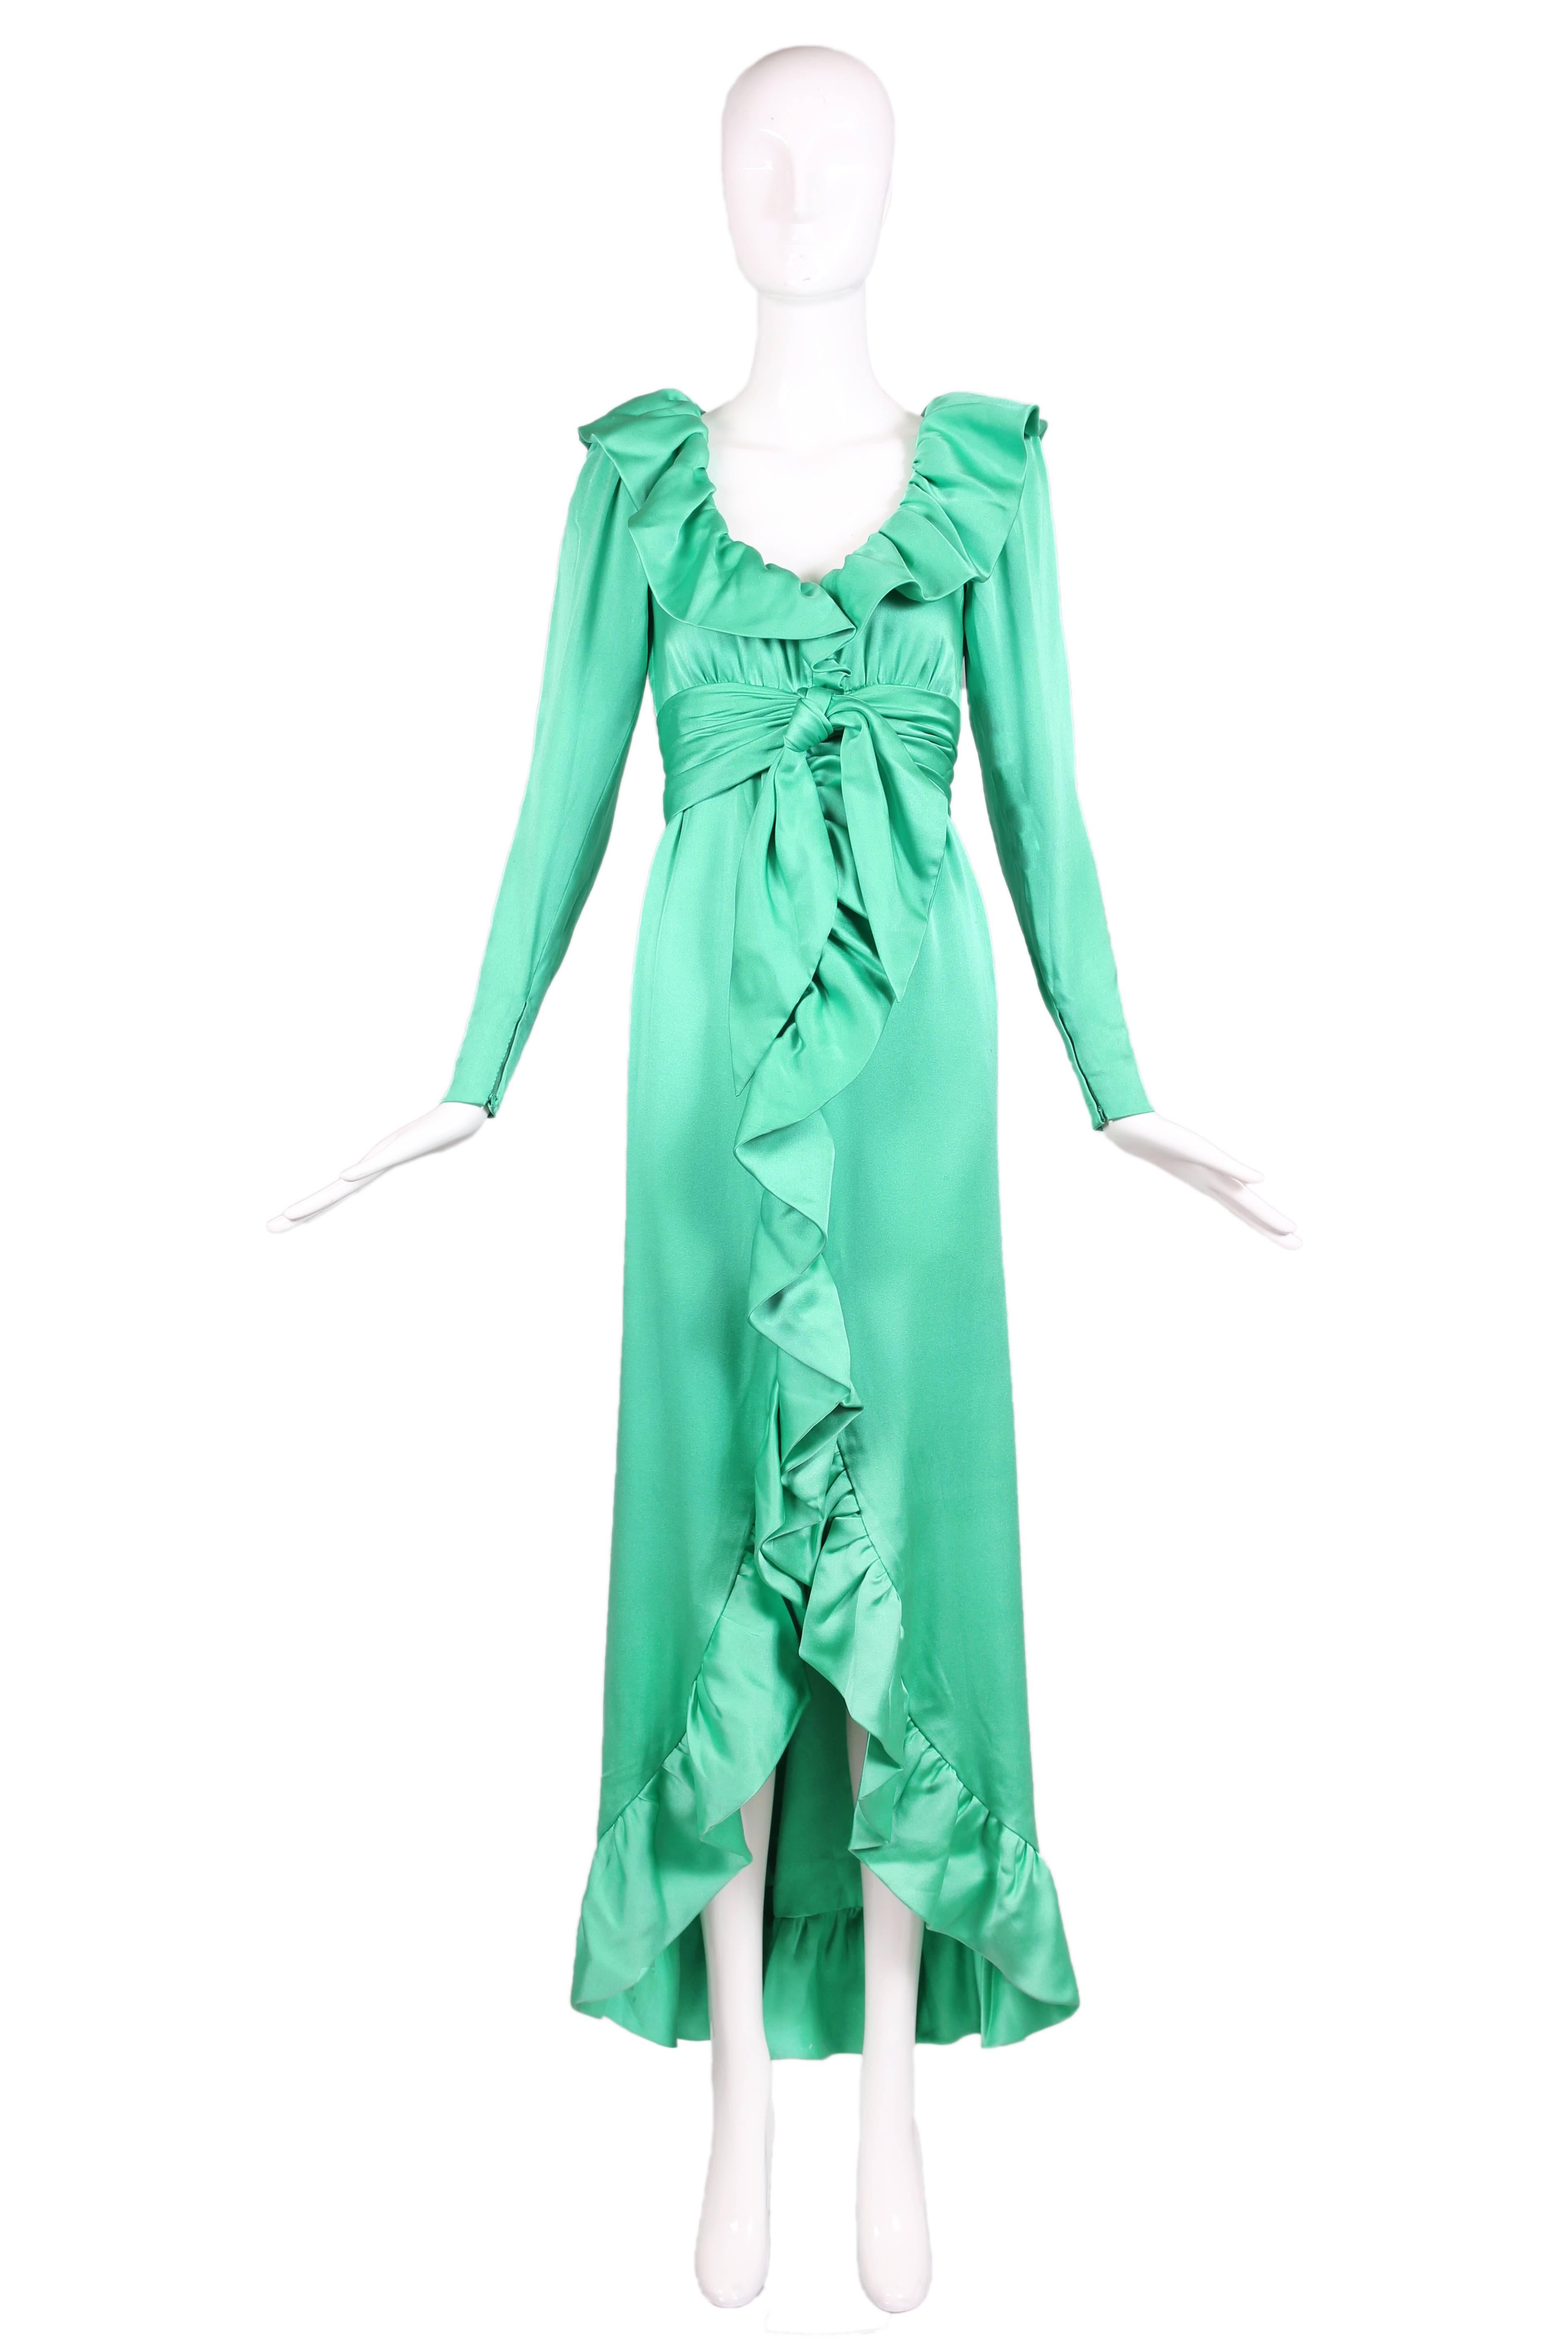 Vintage Givenchy haute couture sea foam green soft silk satin gown featuring  deep V-neckline with ruffle detail throughout. The dress has long sleeves and a waterfall hemline. Zipper closure at back. In excellent condition. 
MEASUREMENTS:
Bust -